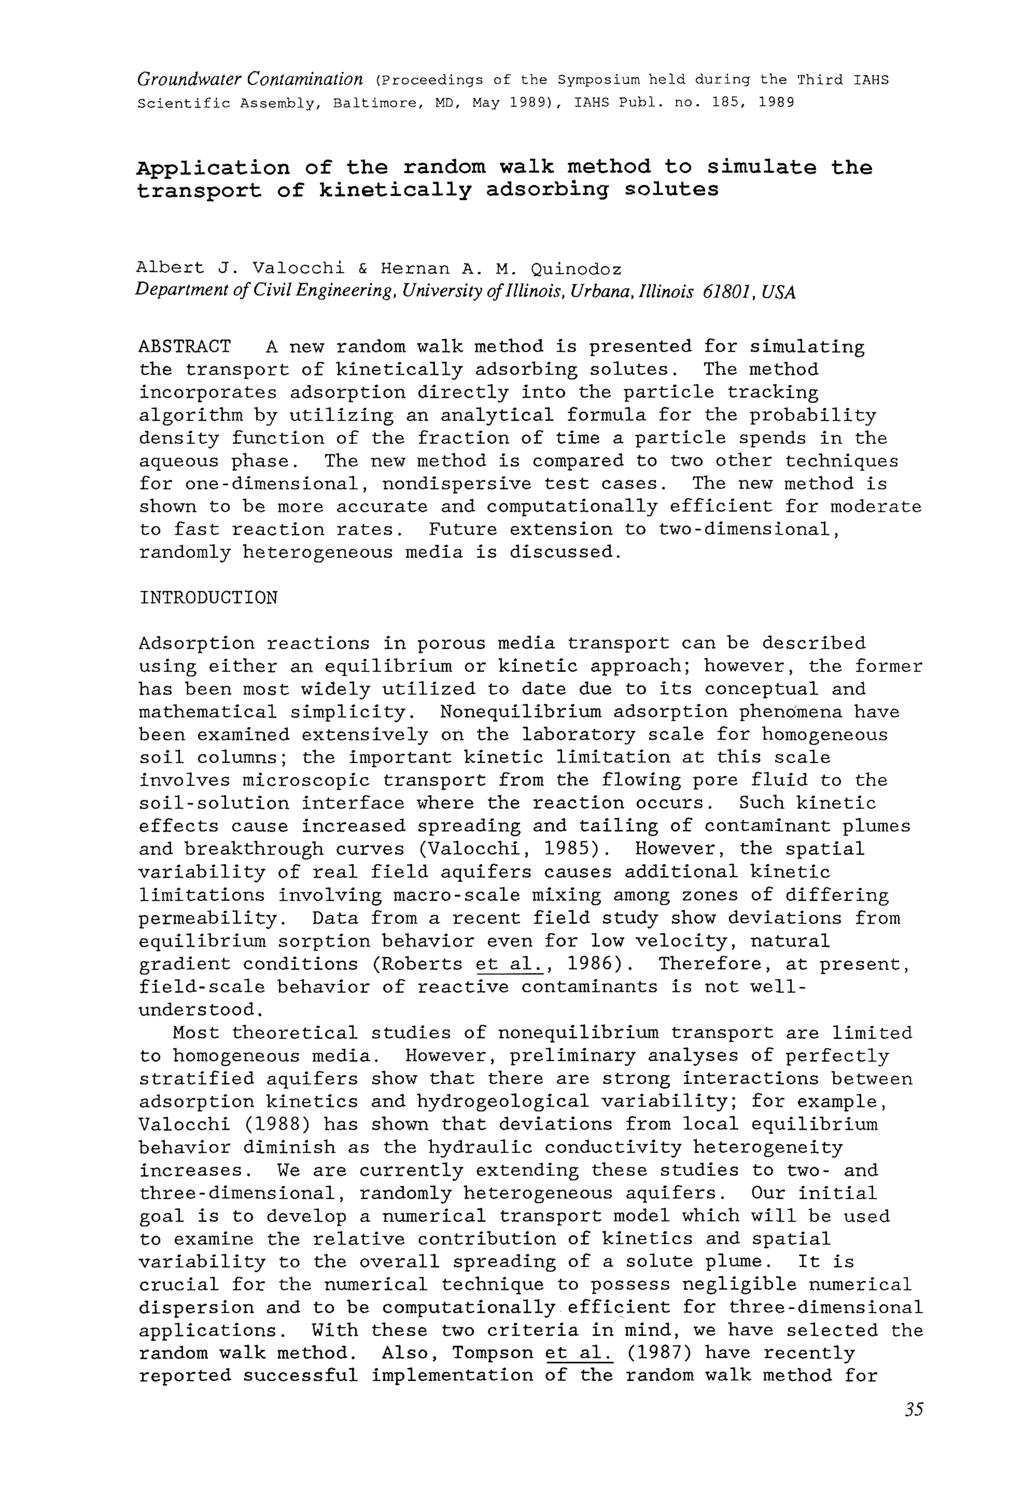 Groundwater Contamination (Proceedings of the Symposium held during the Third IAHS Scientific Assembly, Baltimore, MD, May 1989), IAHS Publ. no.